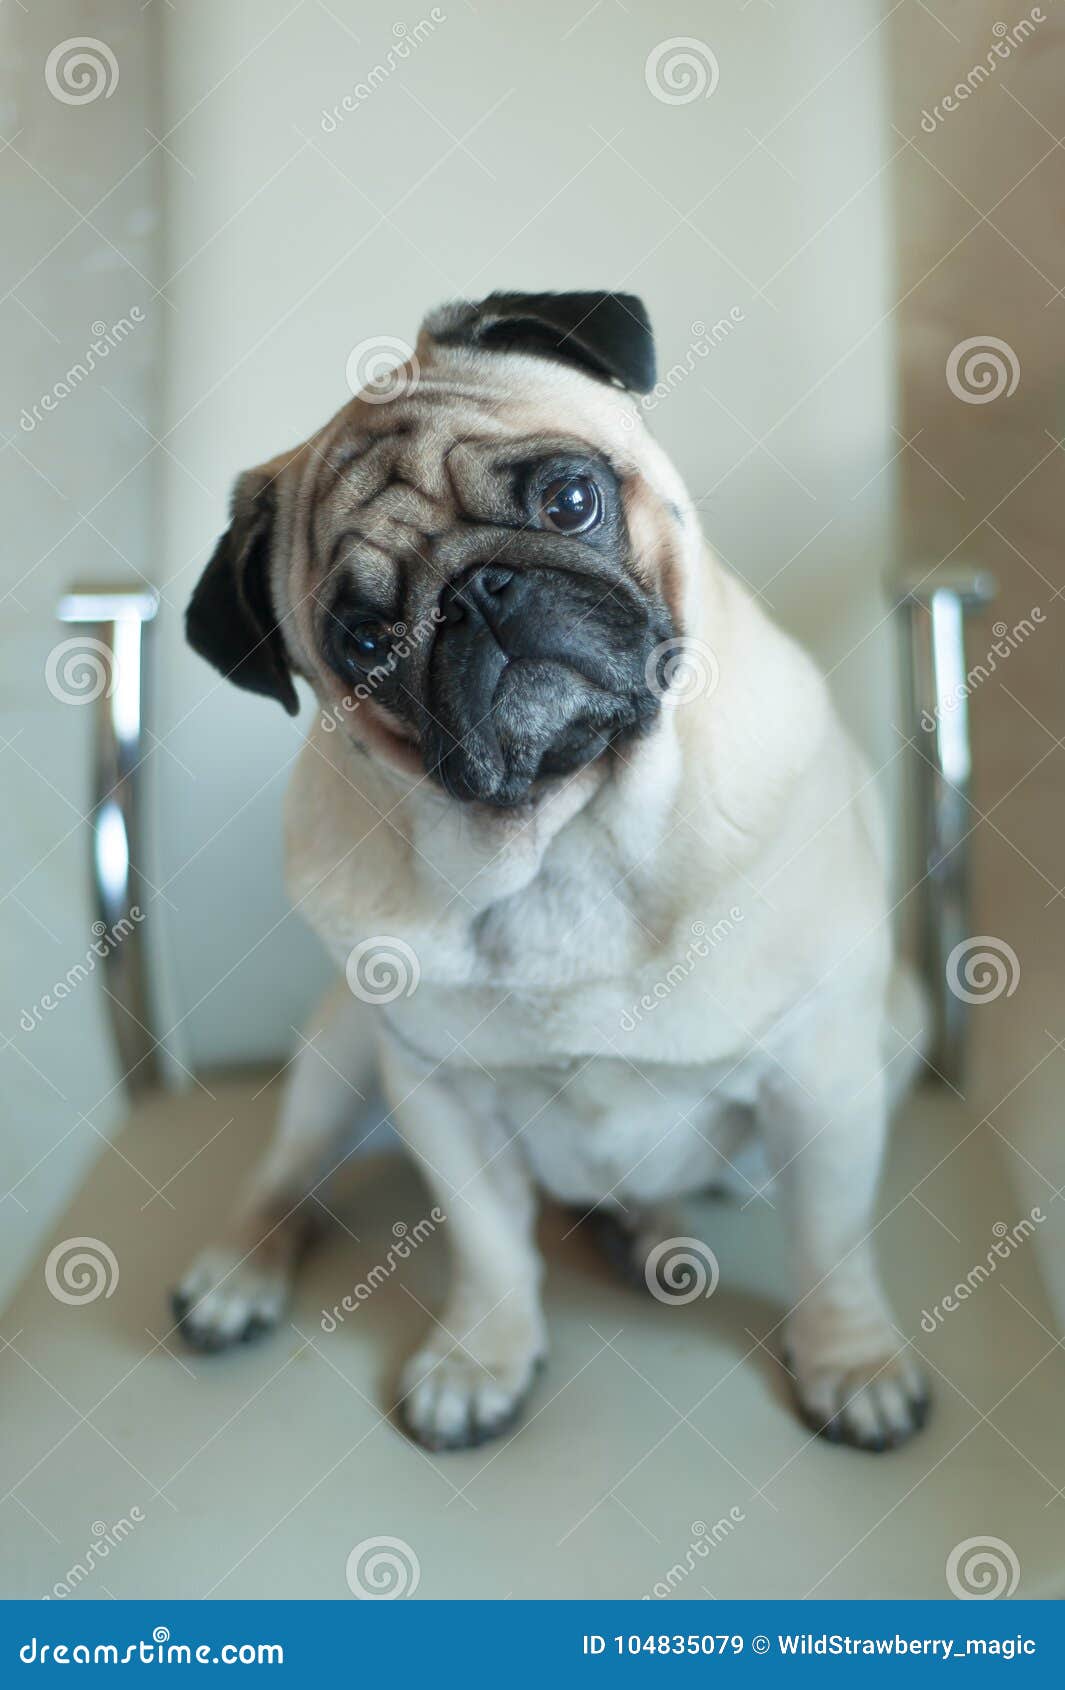 Dog A Cute Pug Sits On A Chair With His Head Tilted Looking A